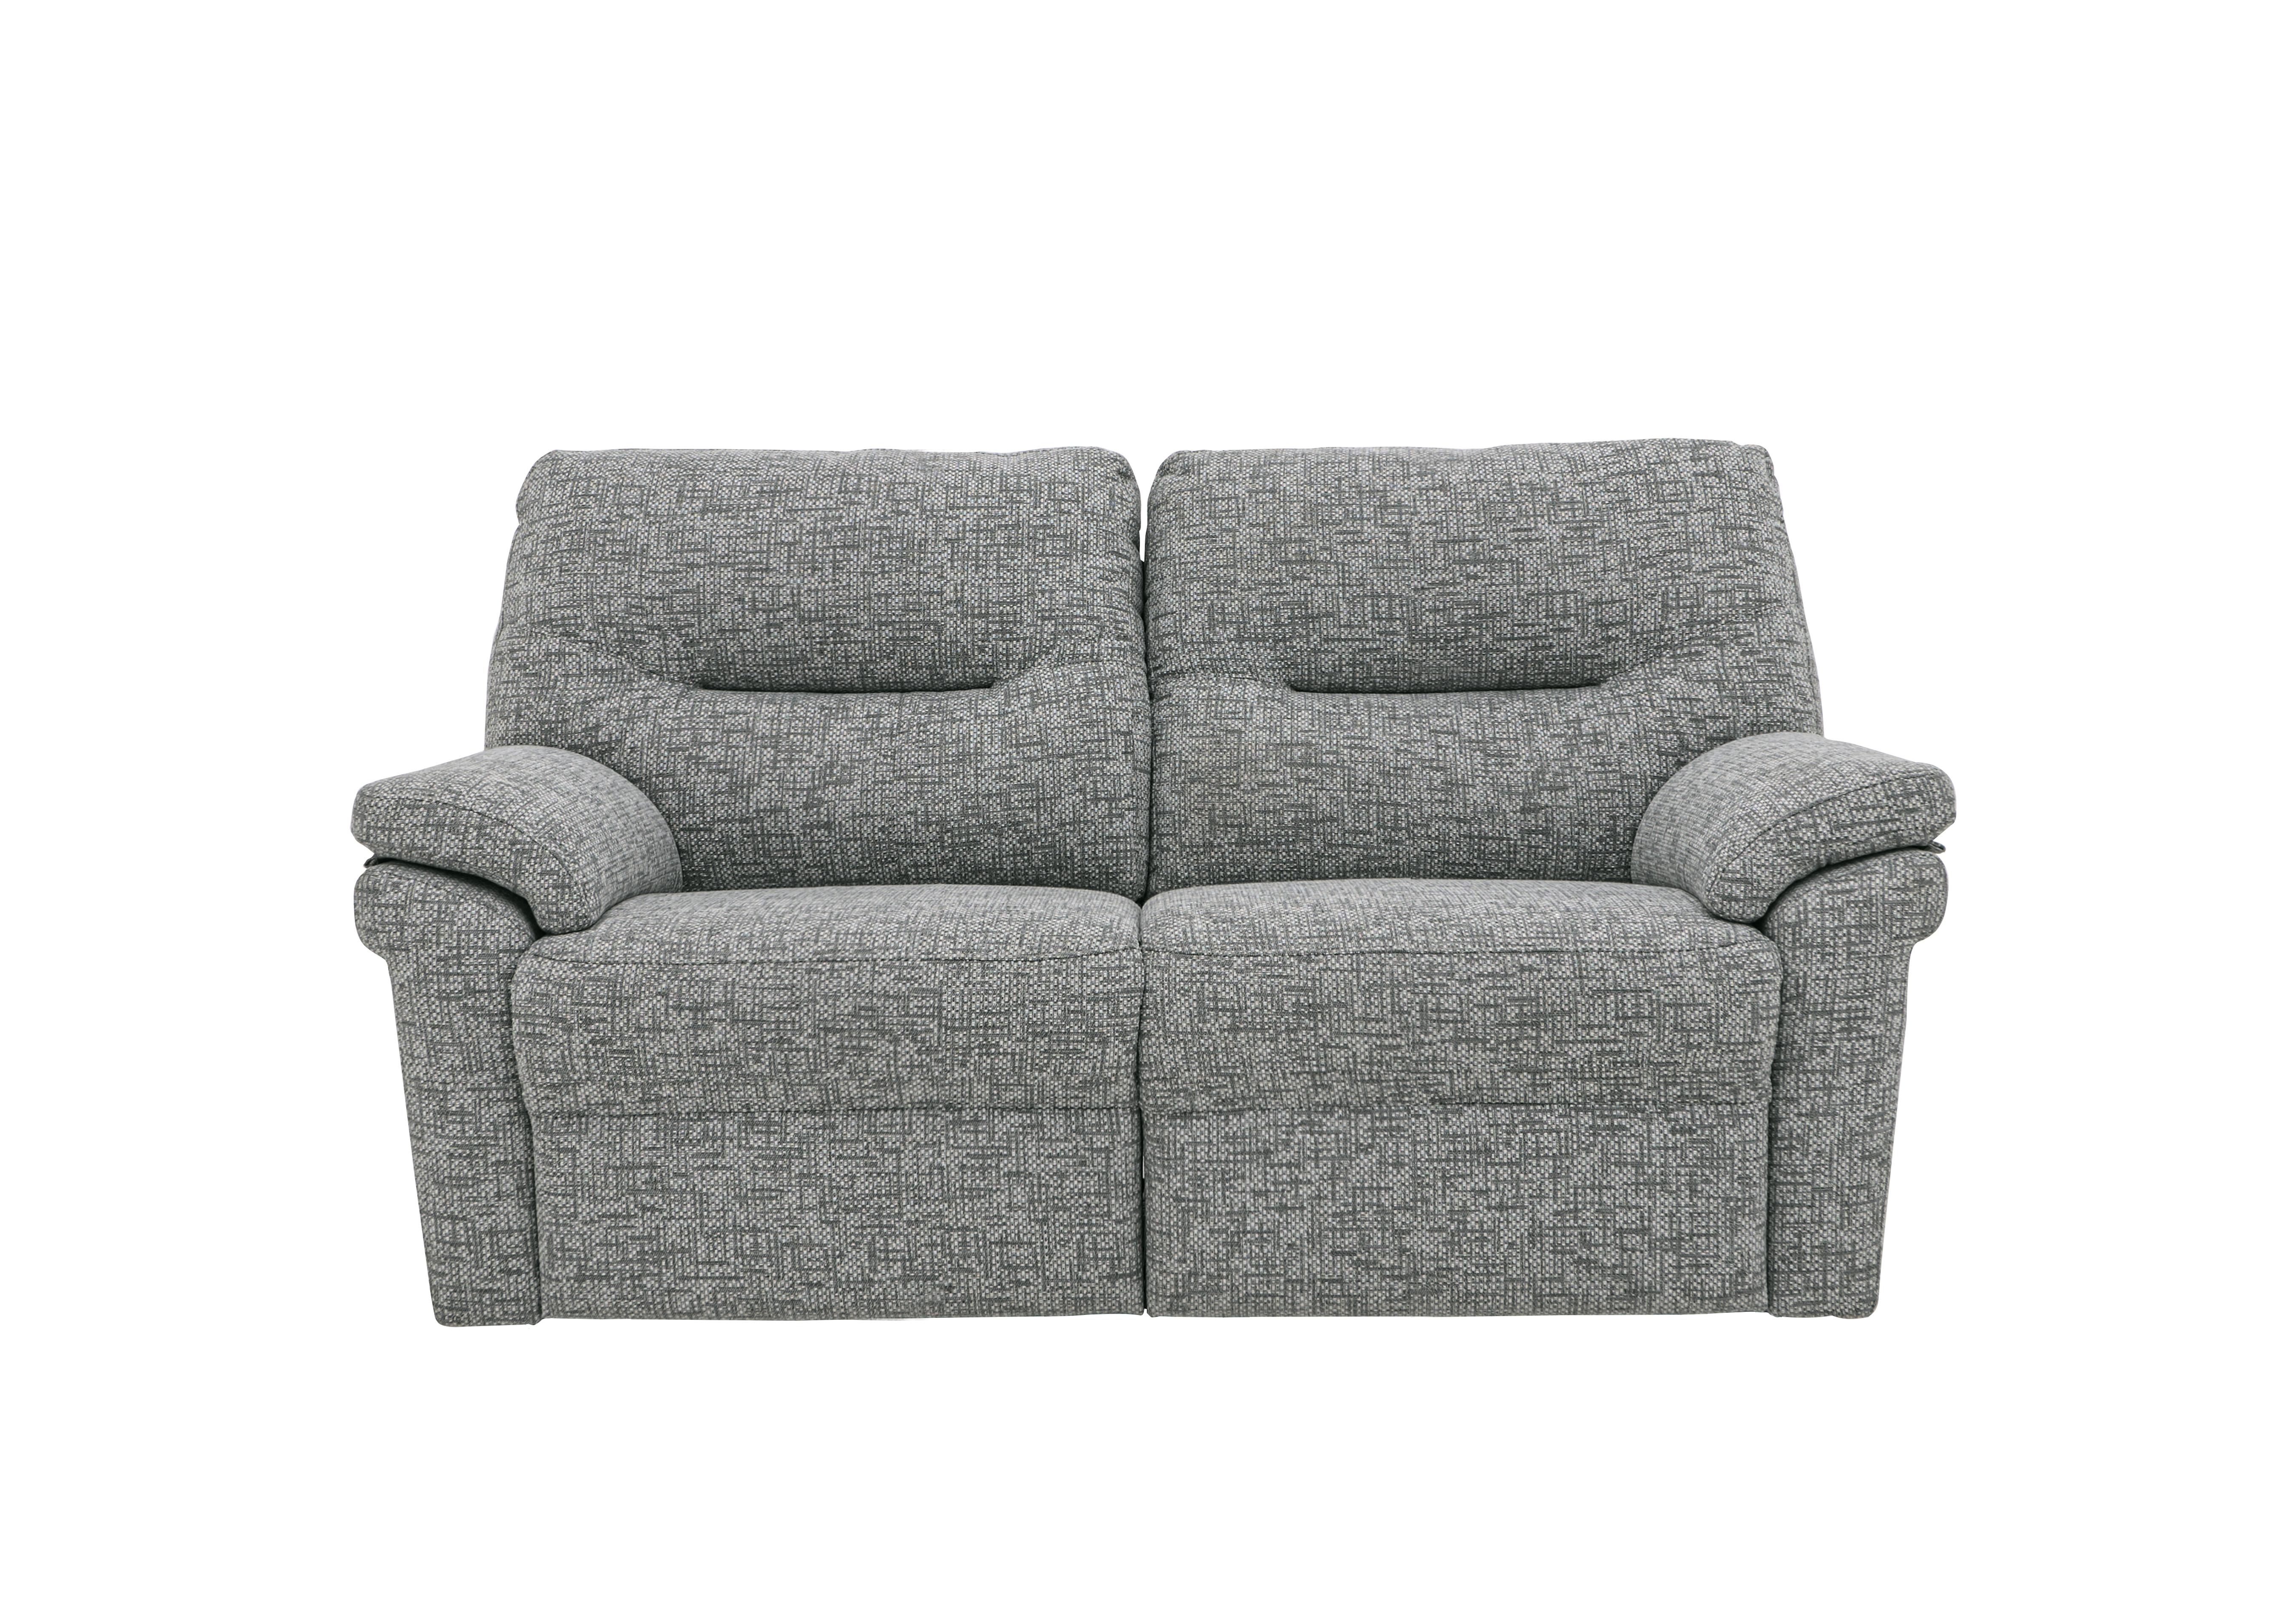 Seattle 2 Seater Fabric Power Recliner Sofa with Power Lumbar in B030 Remco Light Grey on Furniture Village